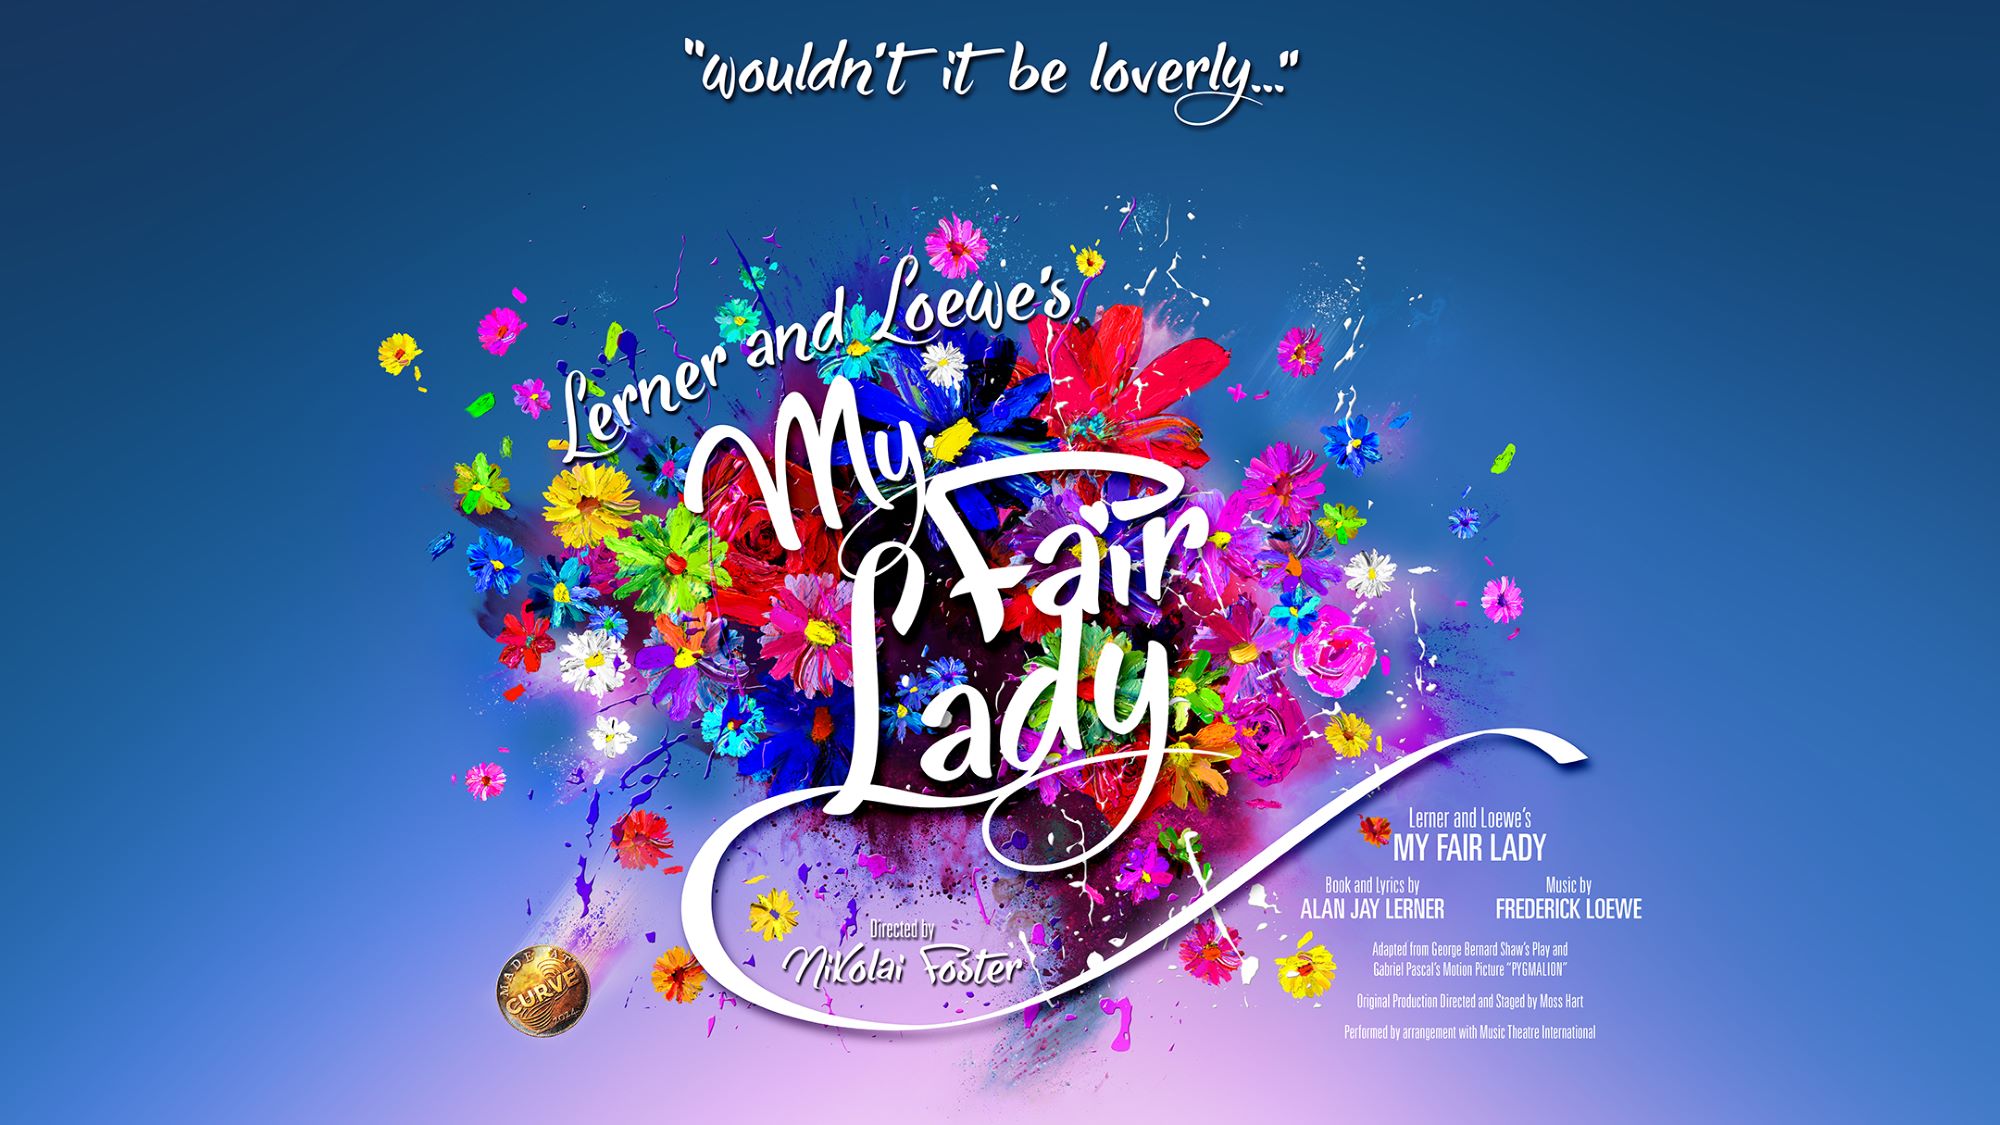 My Fair Lady revival poster